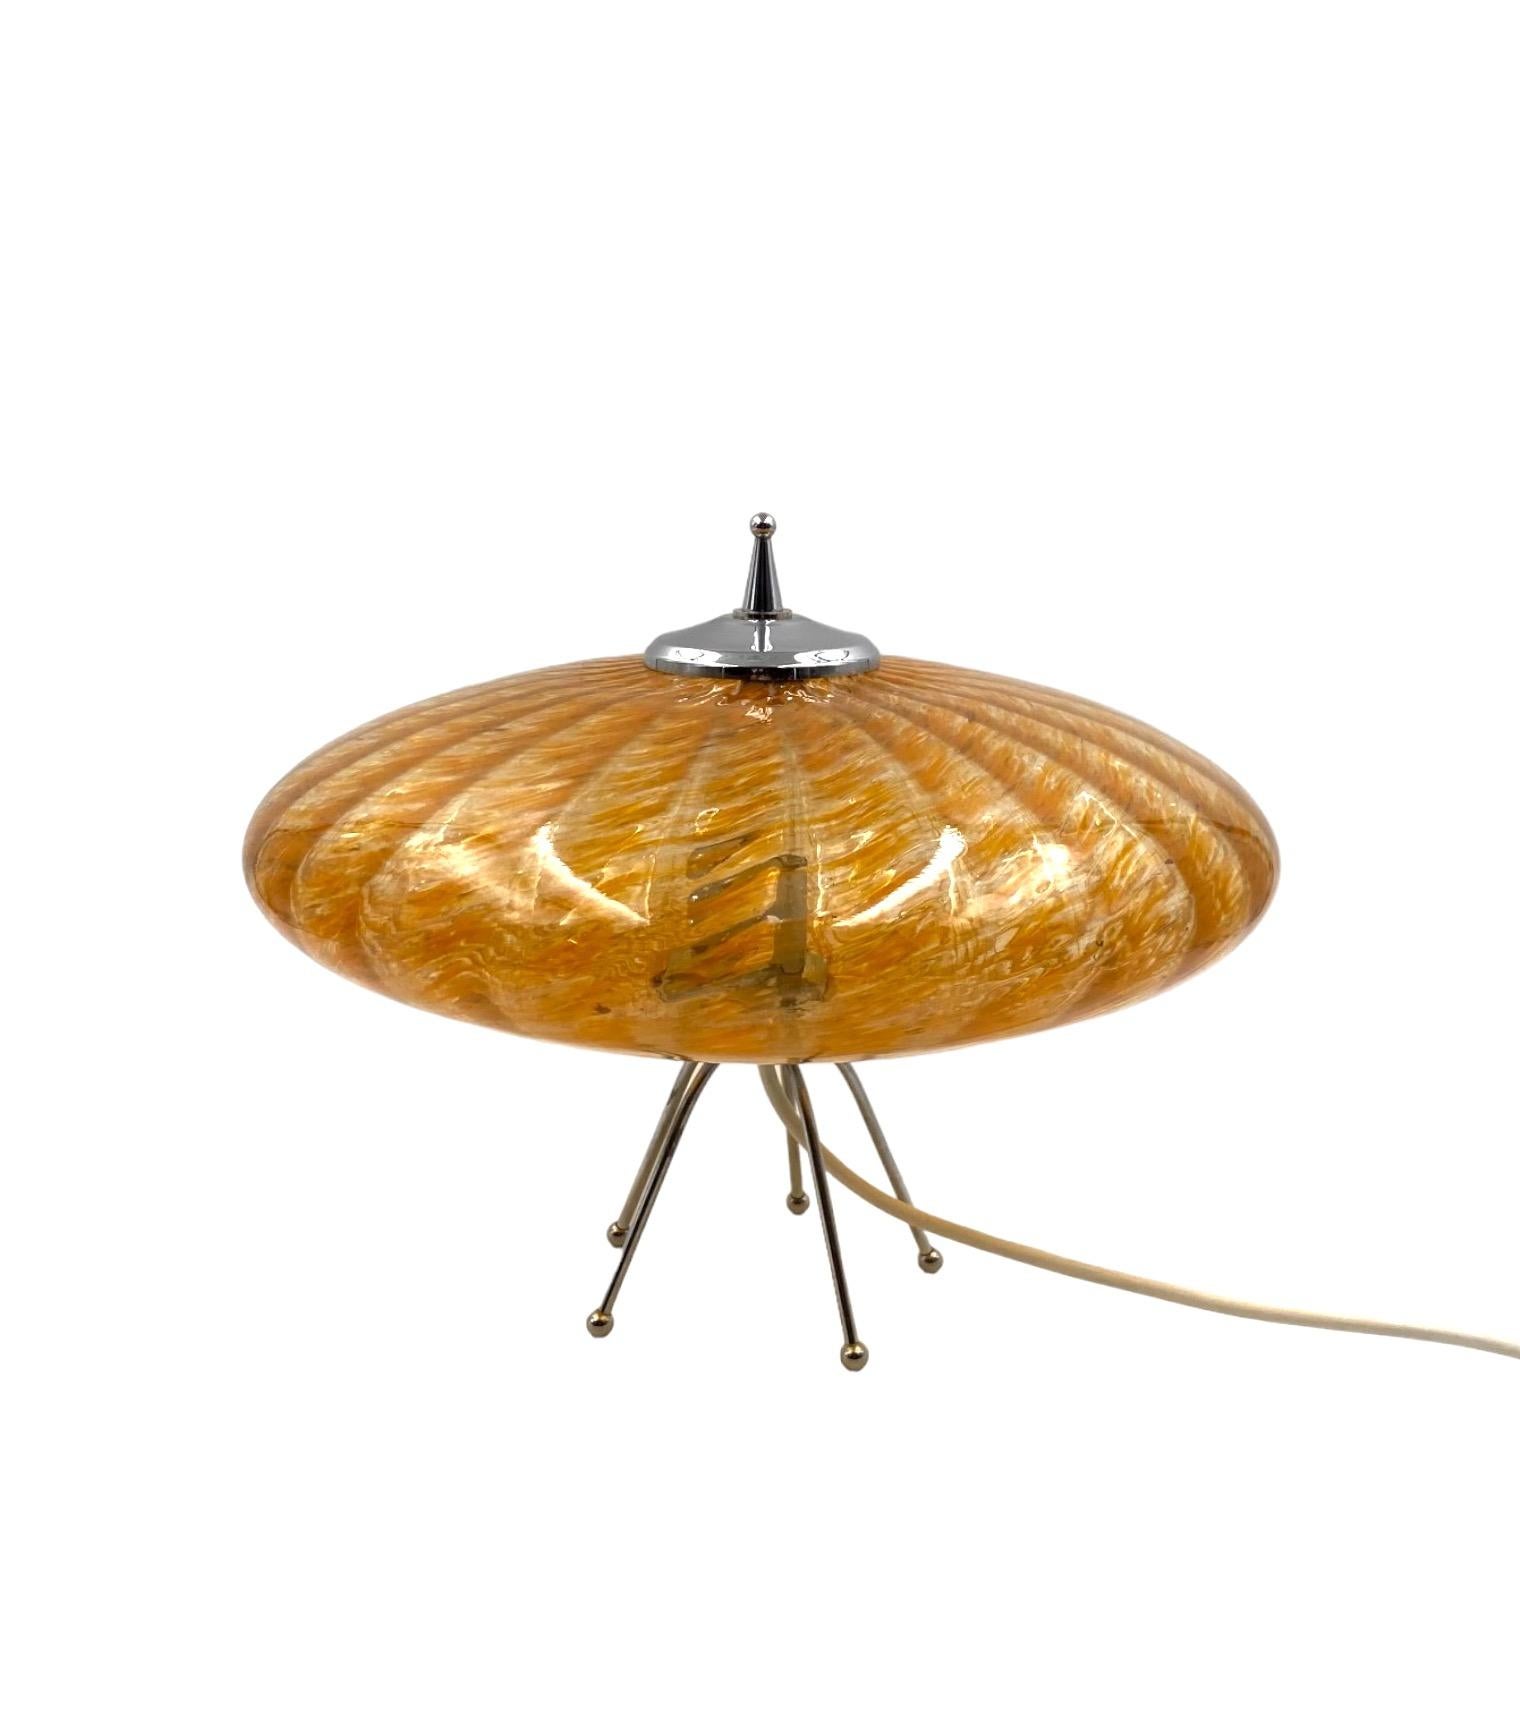 Murano orange glass flying saucer Ufo table lamp, Murano Italy 1970s For Sale 4